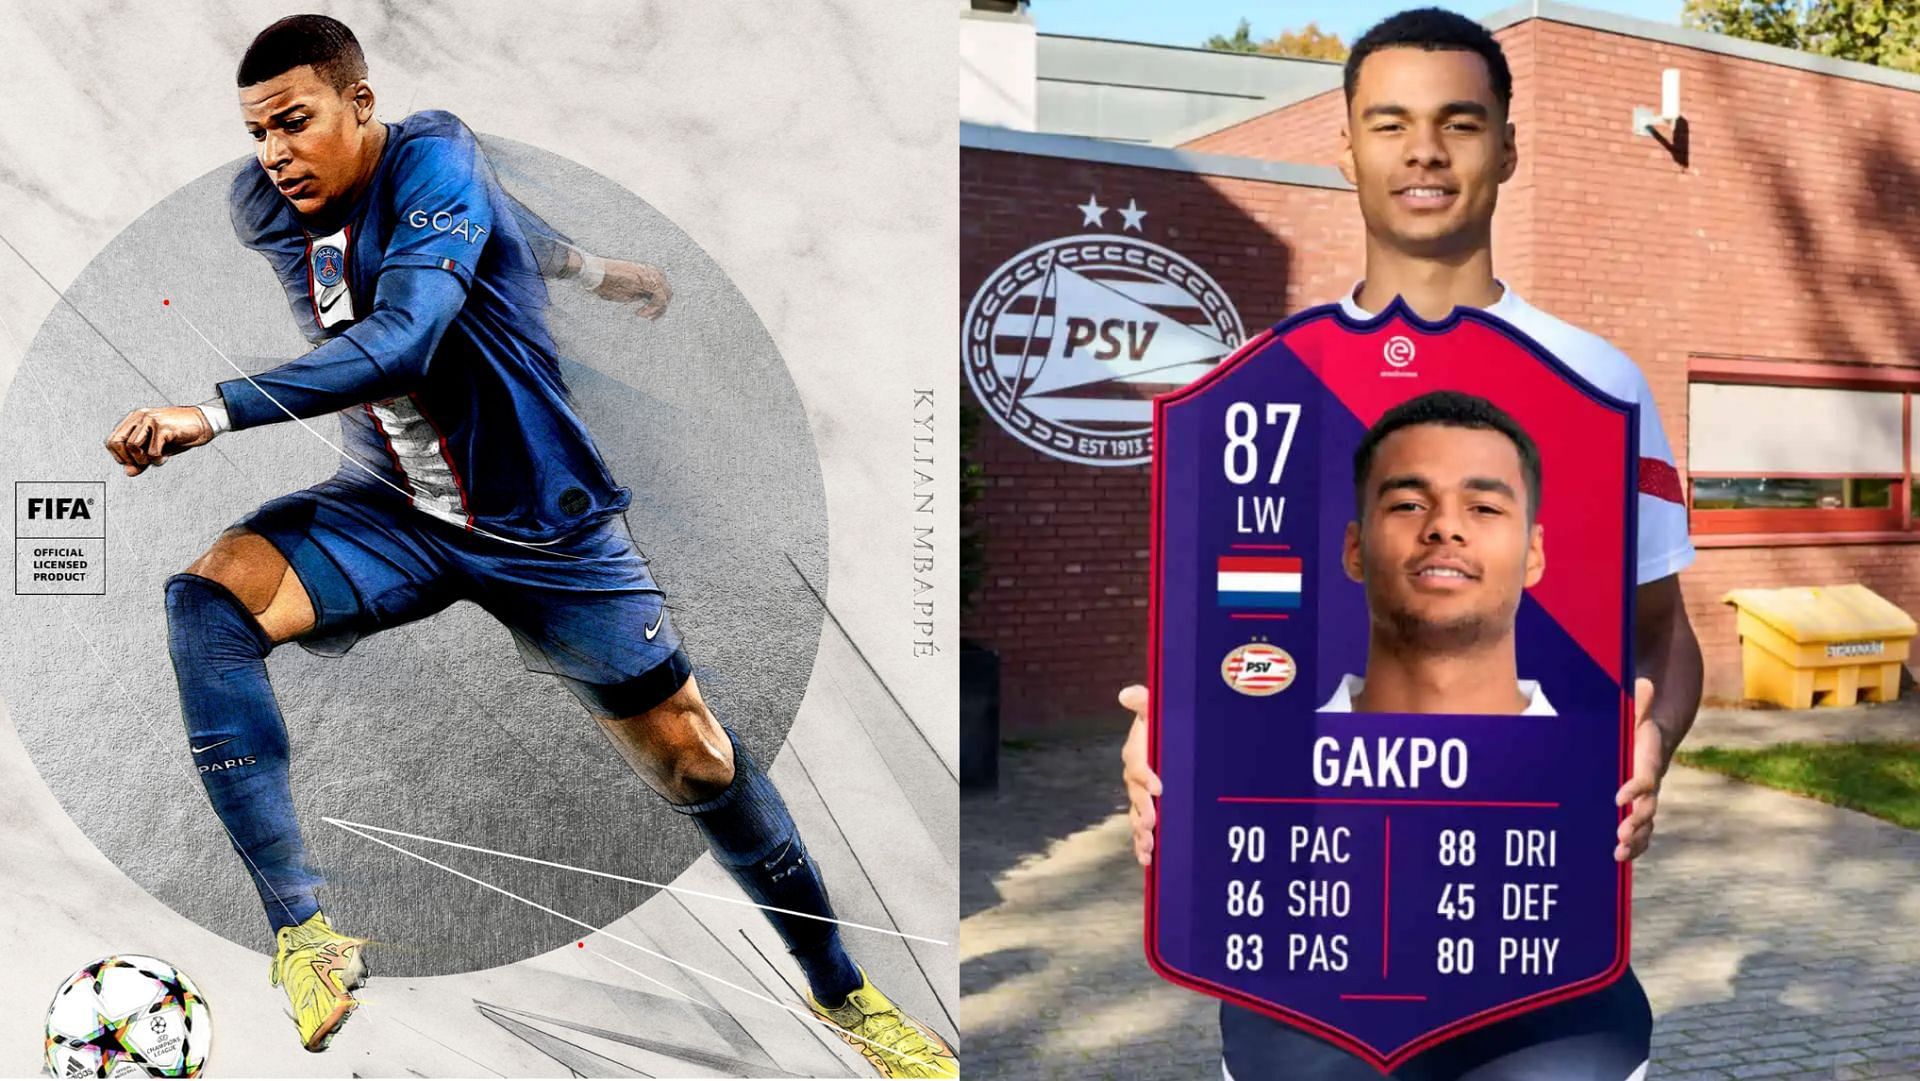 Cody Gakpo has won back-to-back POTM in the Eridivisie (Images via EA Sports)